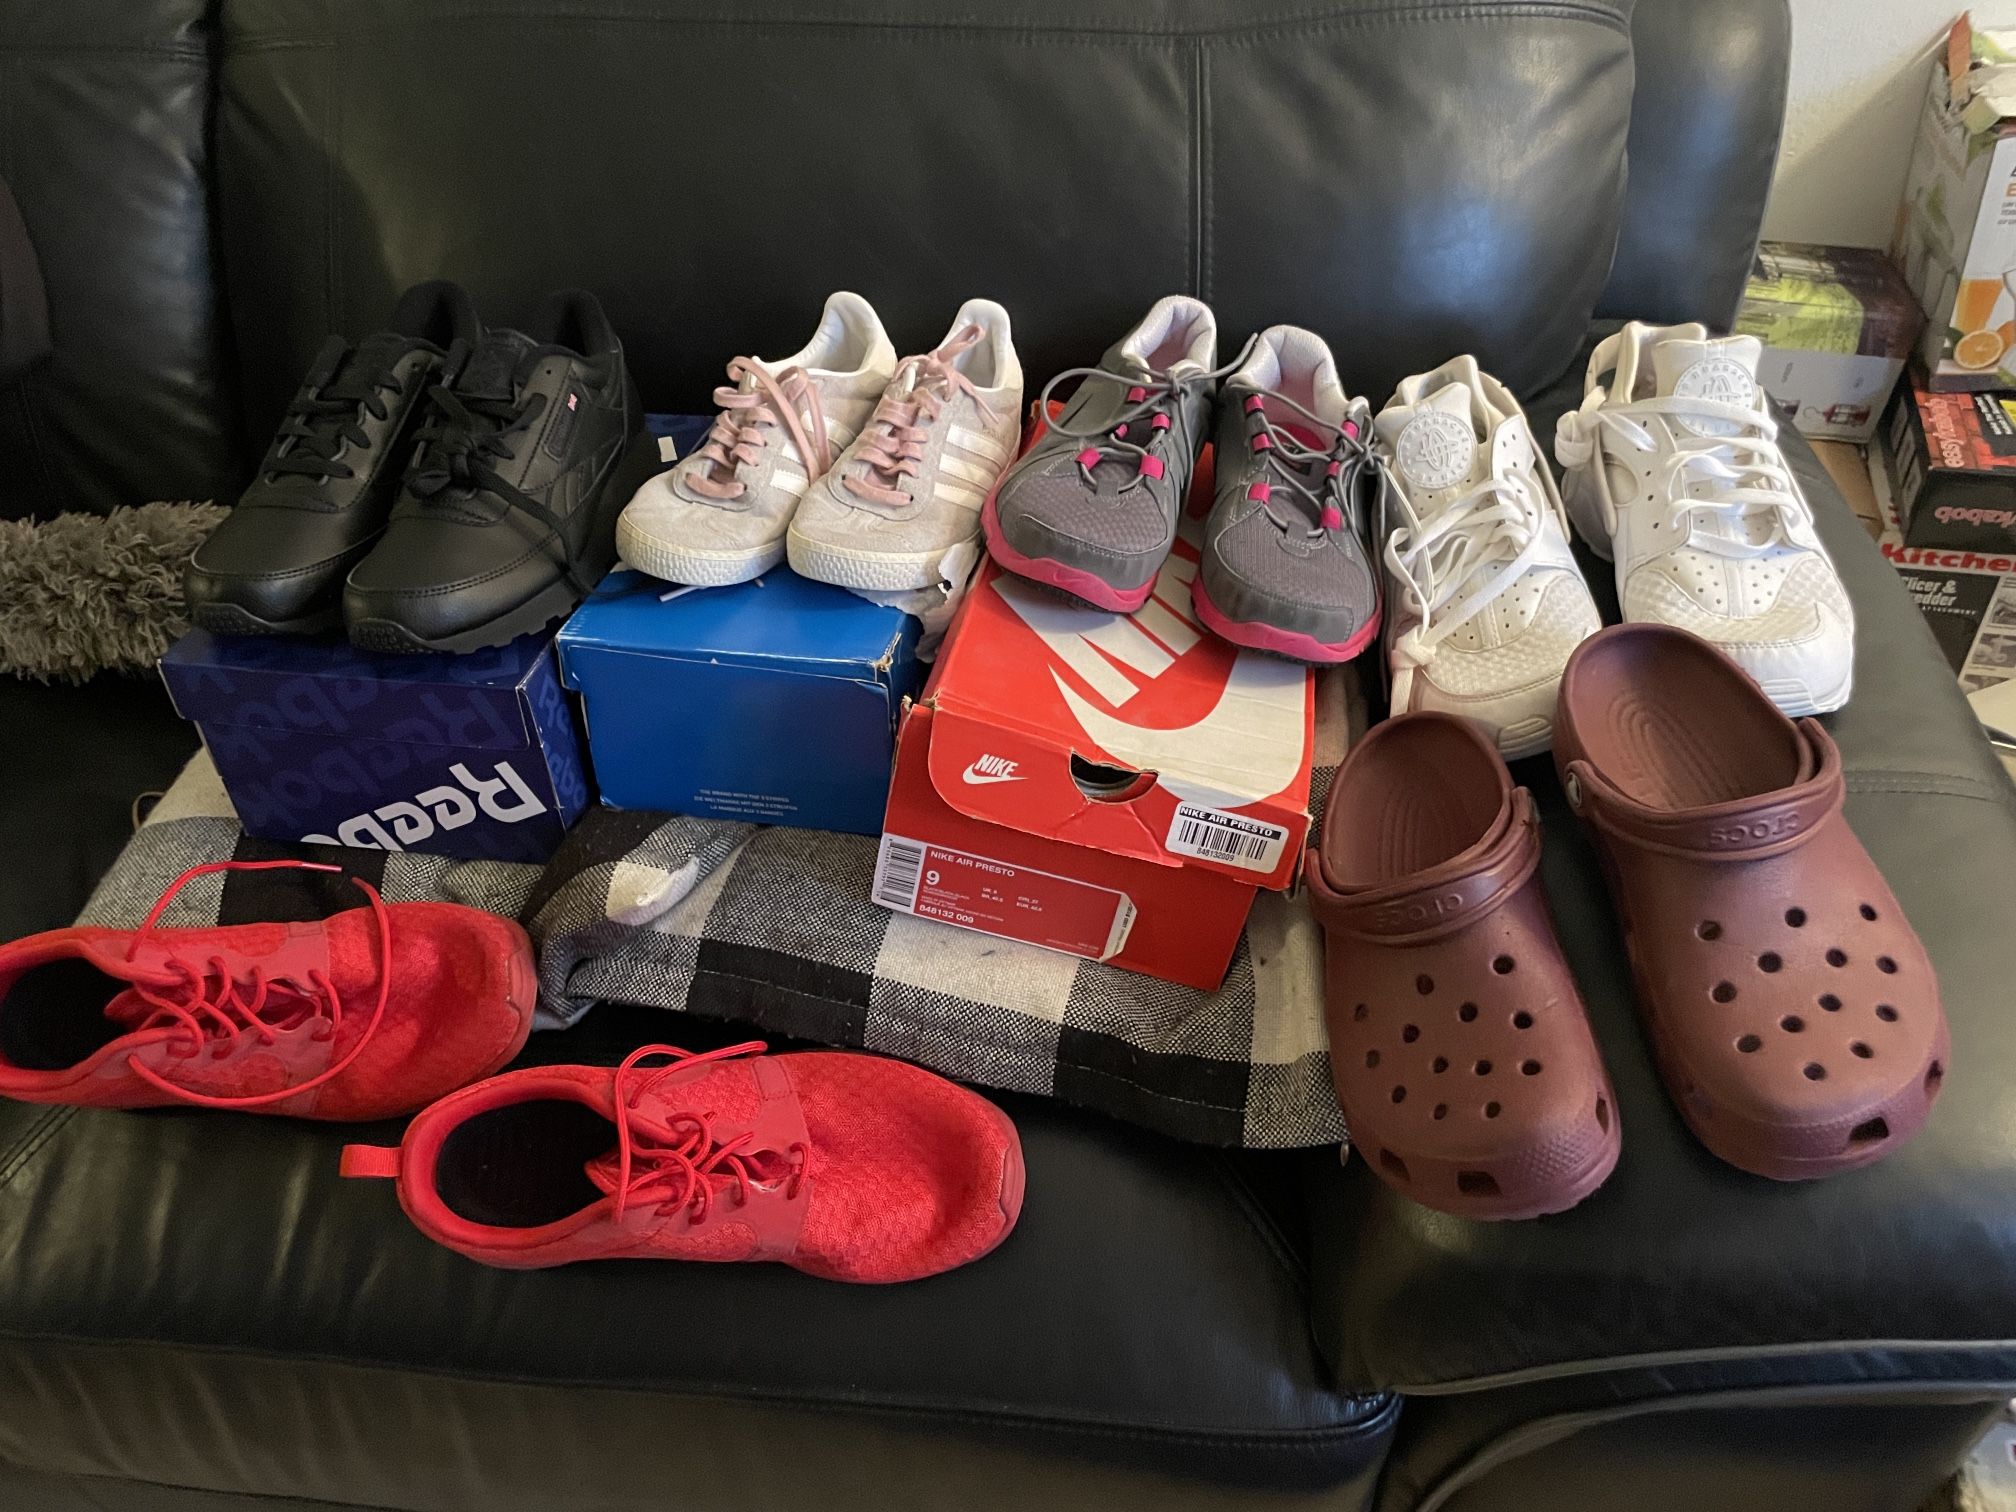 Iam Selling 5 Pair Of  Sneakers Of Different Size And Brand For Women And Men Some New Never Use  Worn  Other Barely Used  And A Cross  Sandal  The Br